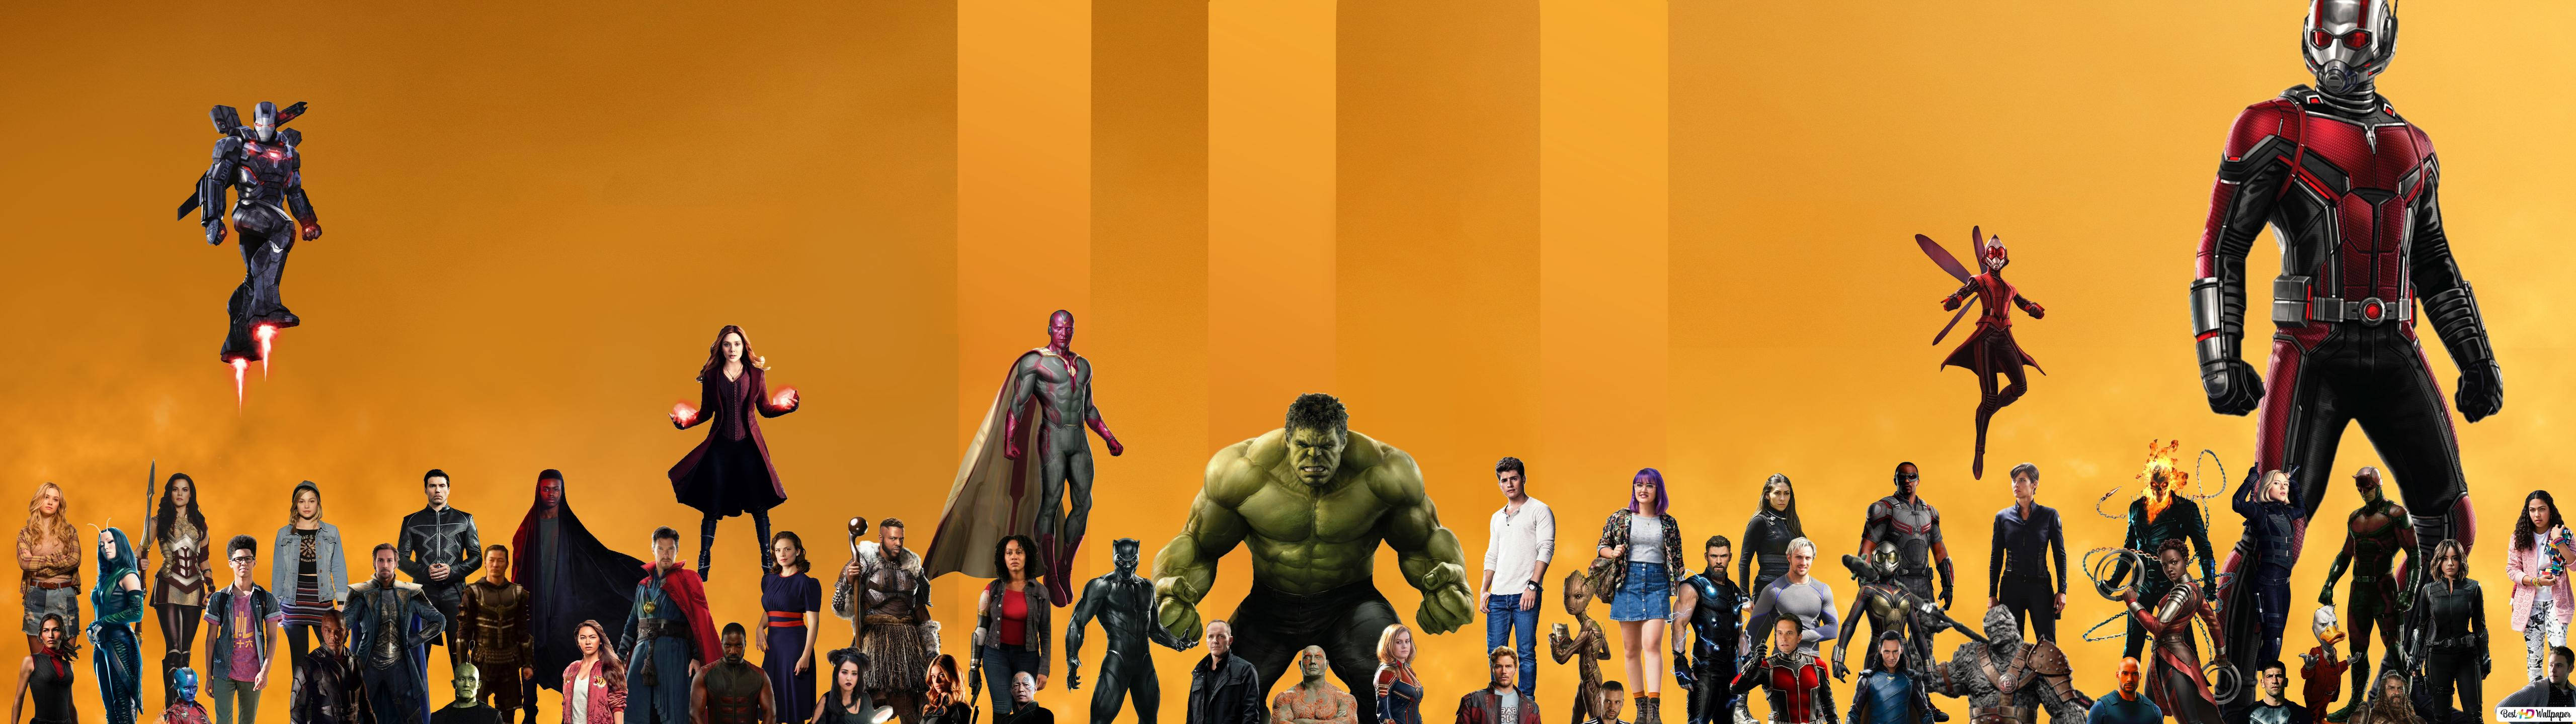 Complete Marvel Heroes 5120 X 1440 Background